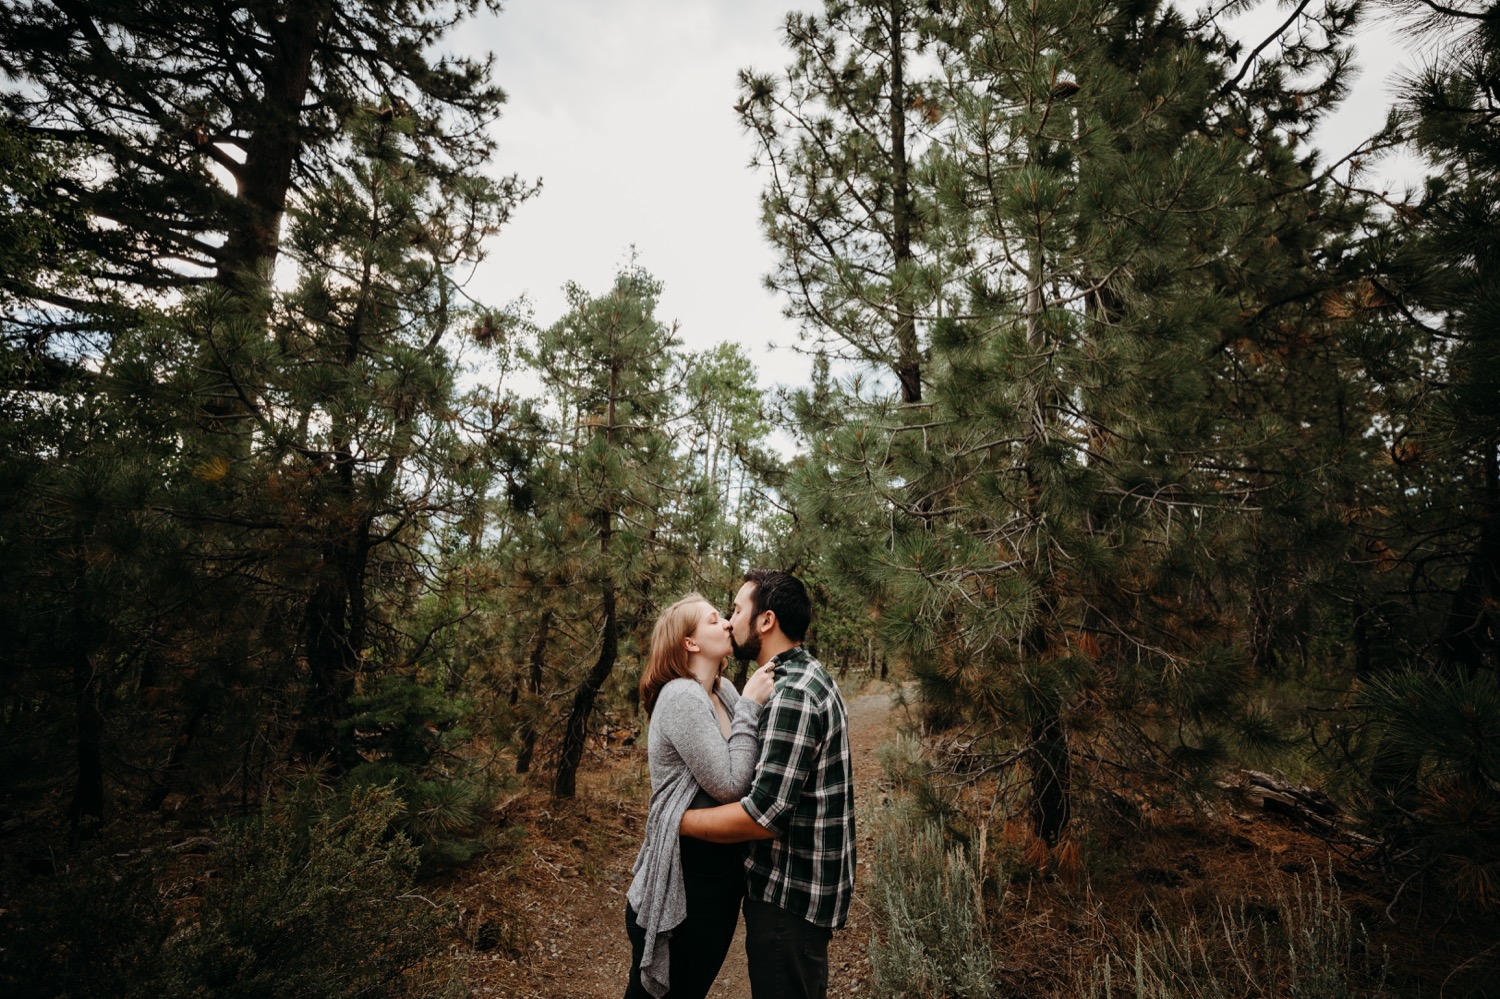 Woodsy engagement photoshoot. Skyline trail in South Lake Tahoe.